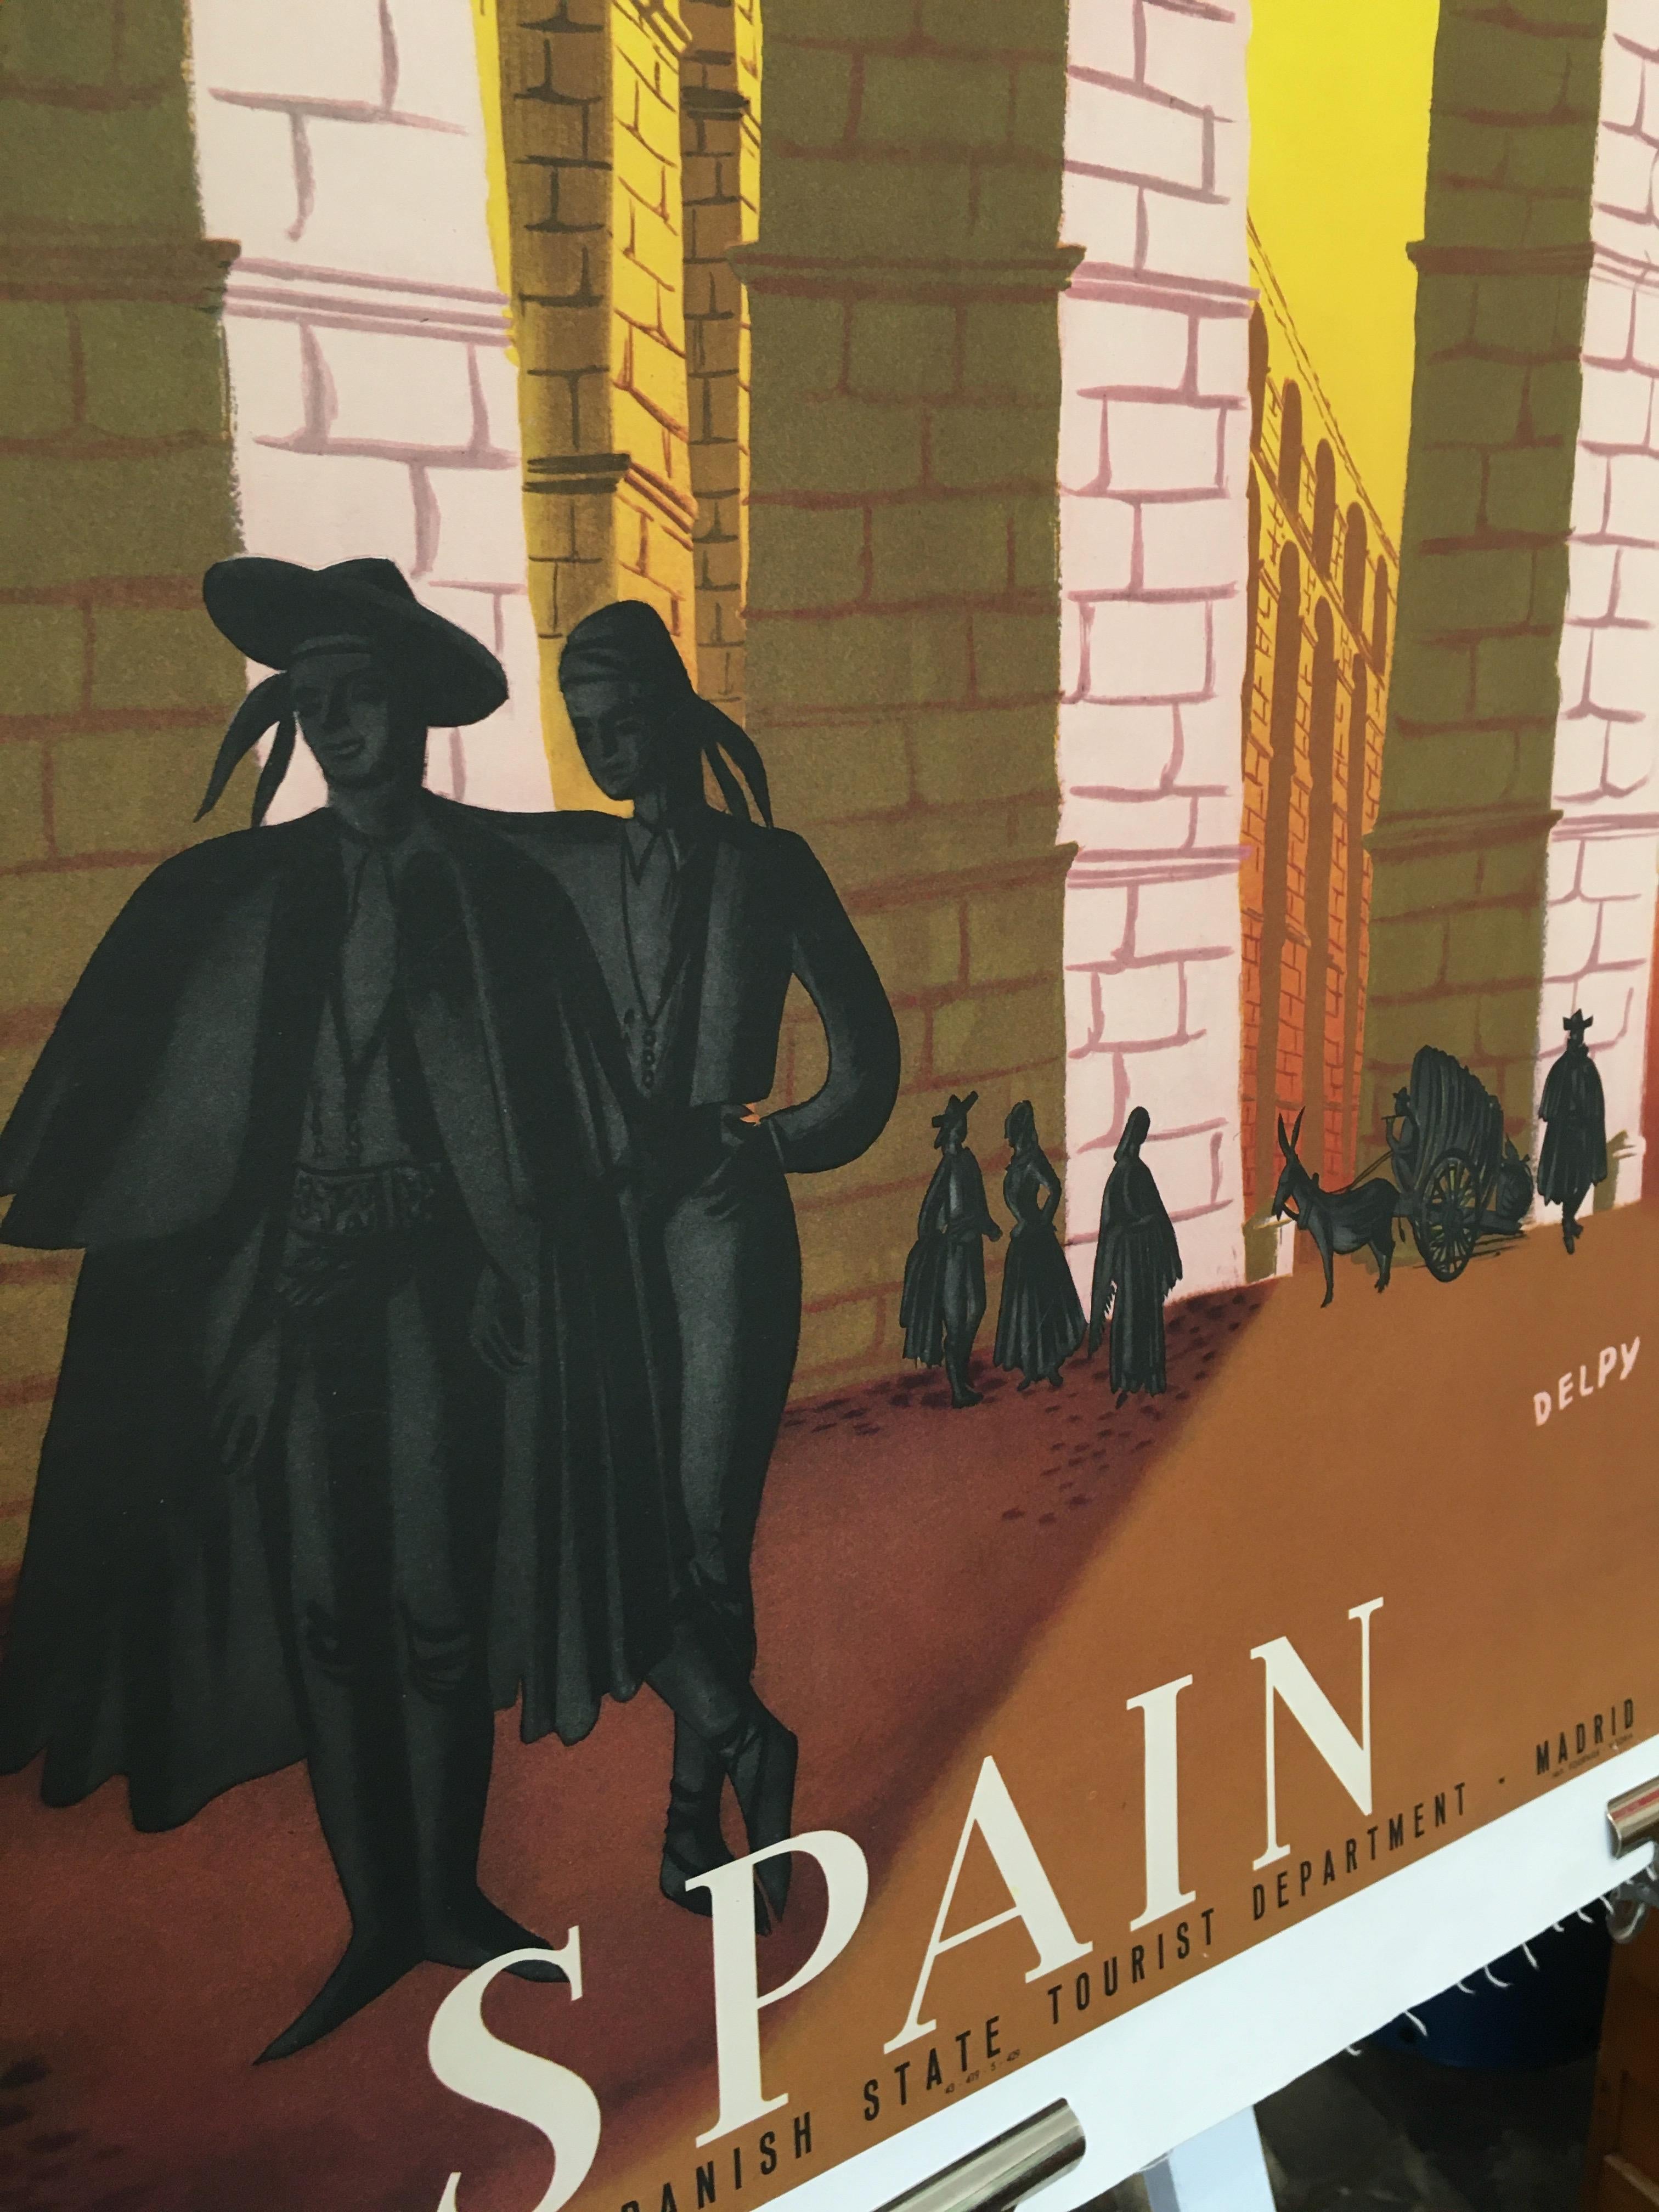 'Spain' Travel and Tourism Original Vintage Poster by Delpy, 1948 In Good Condition For Sale In Melbourne, Victoria